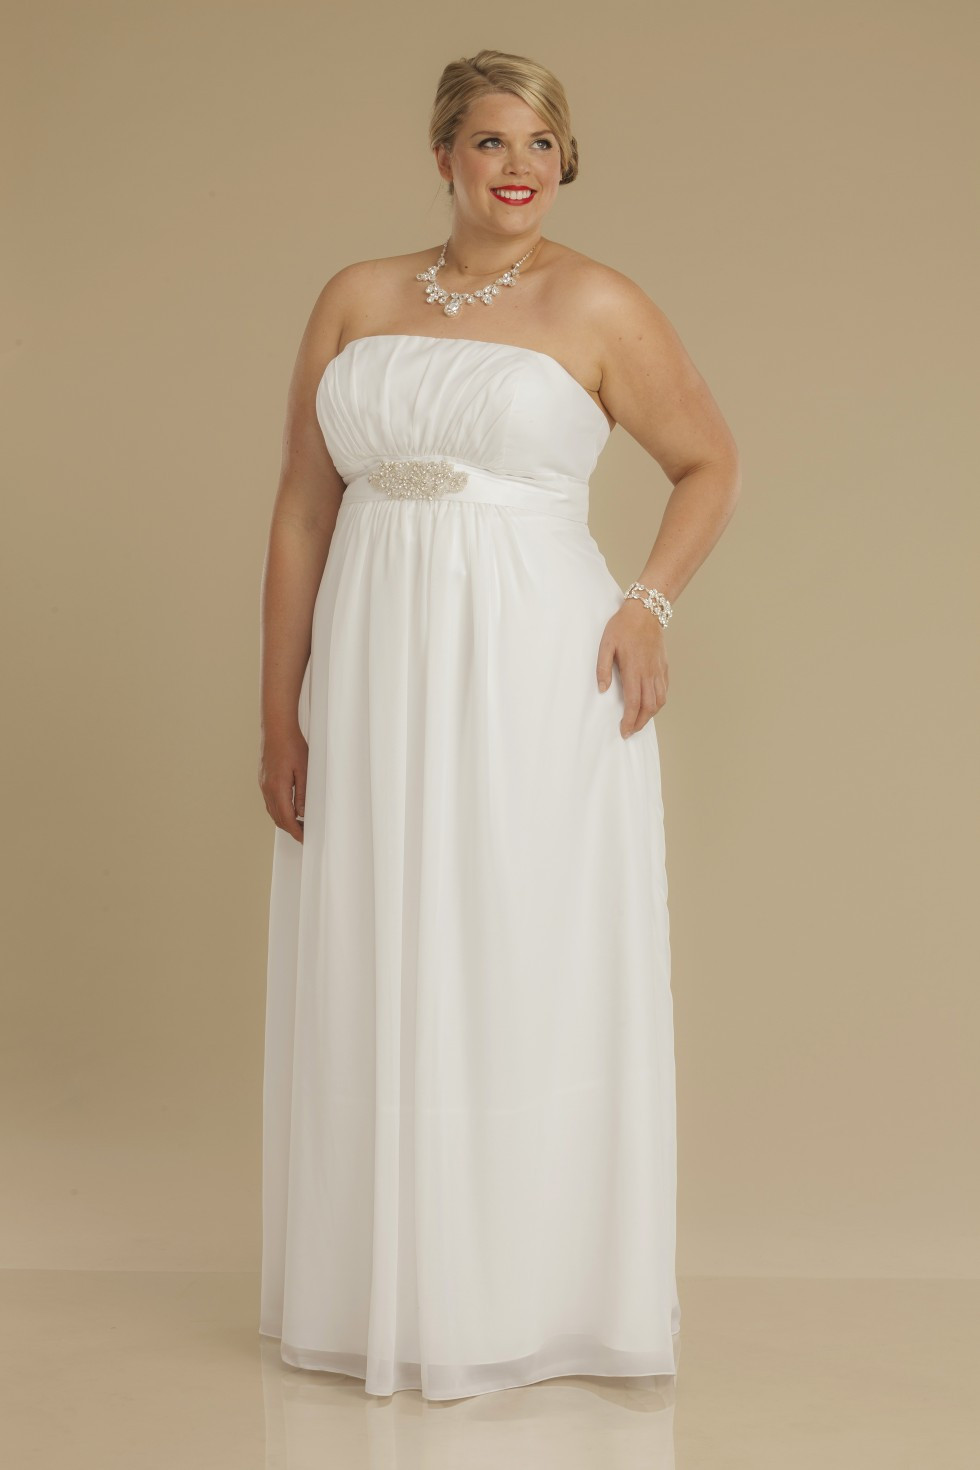 Affordable Wedding Gowns
 Cheap wedding dress Aster Plus size wedding dresses